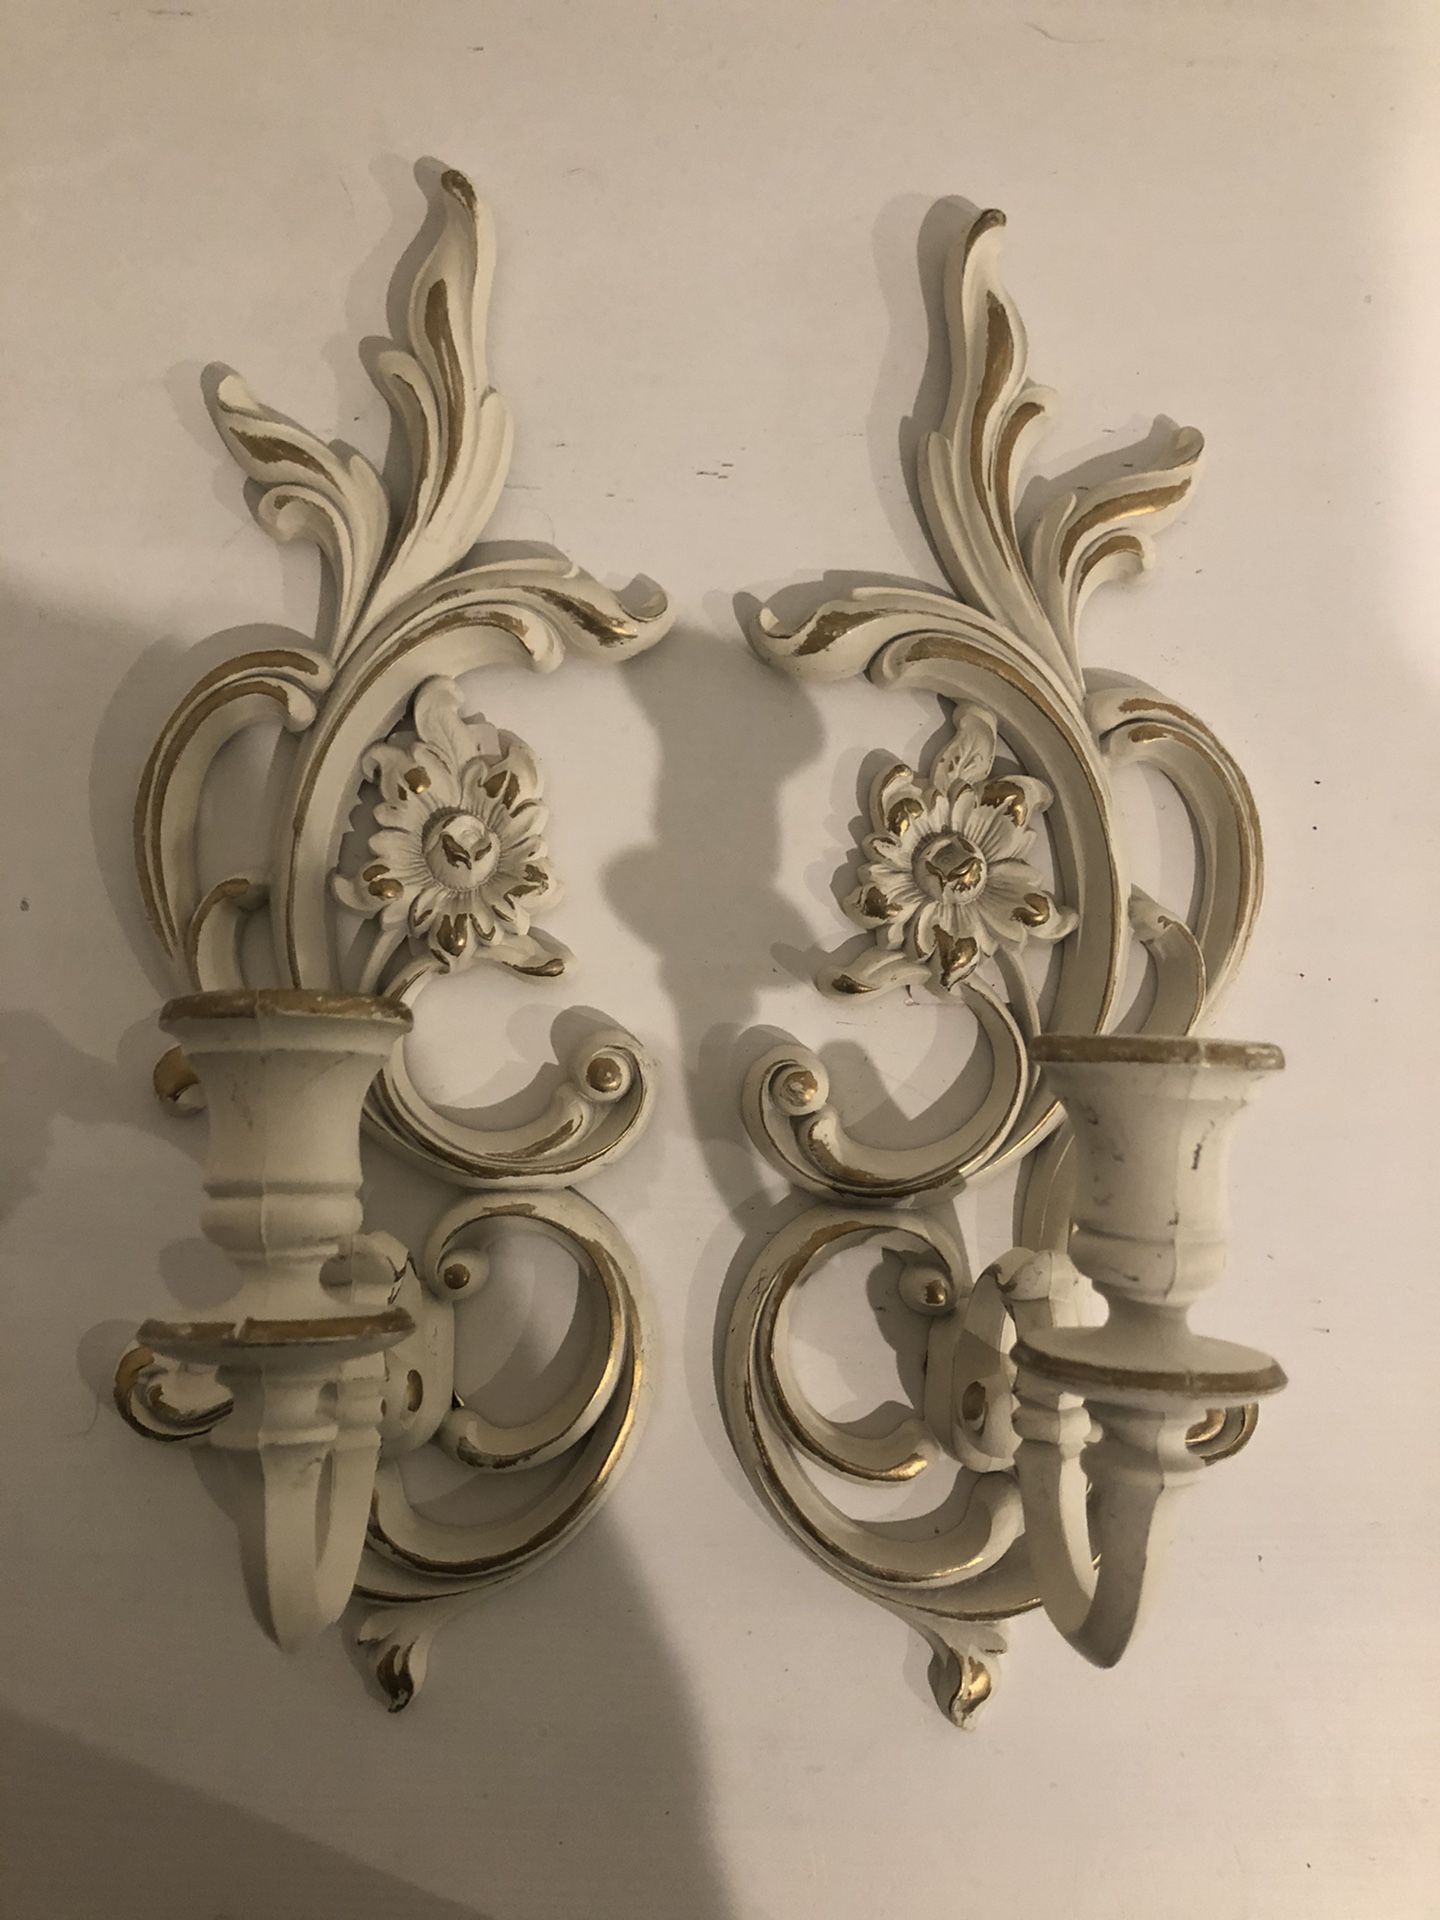 Vintage syroco wood sconces candle holders wall decor shabby chic French provincial